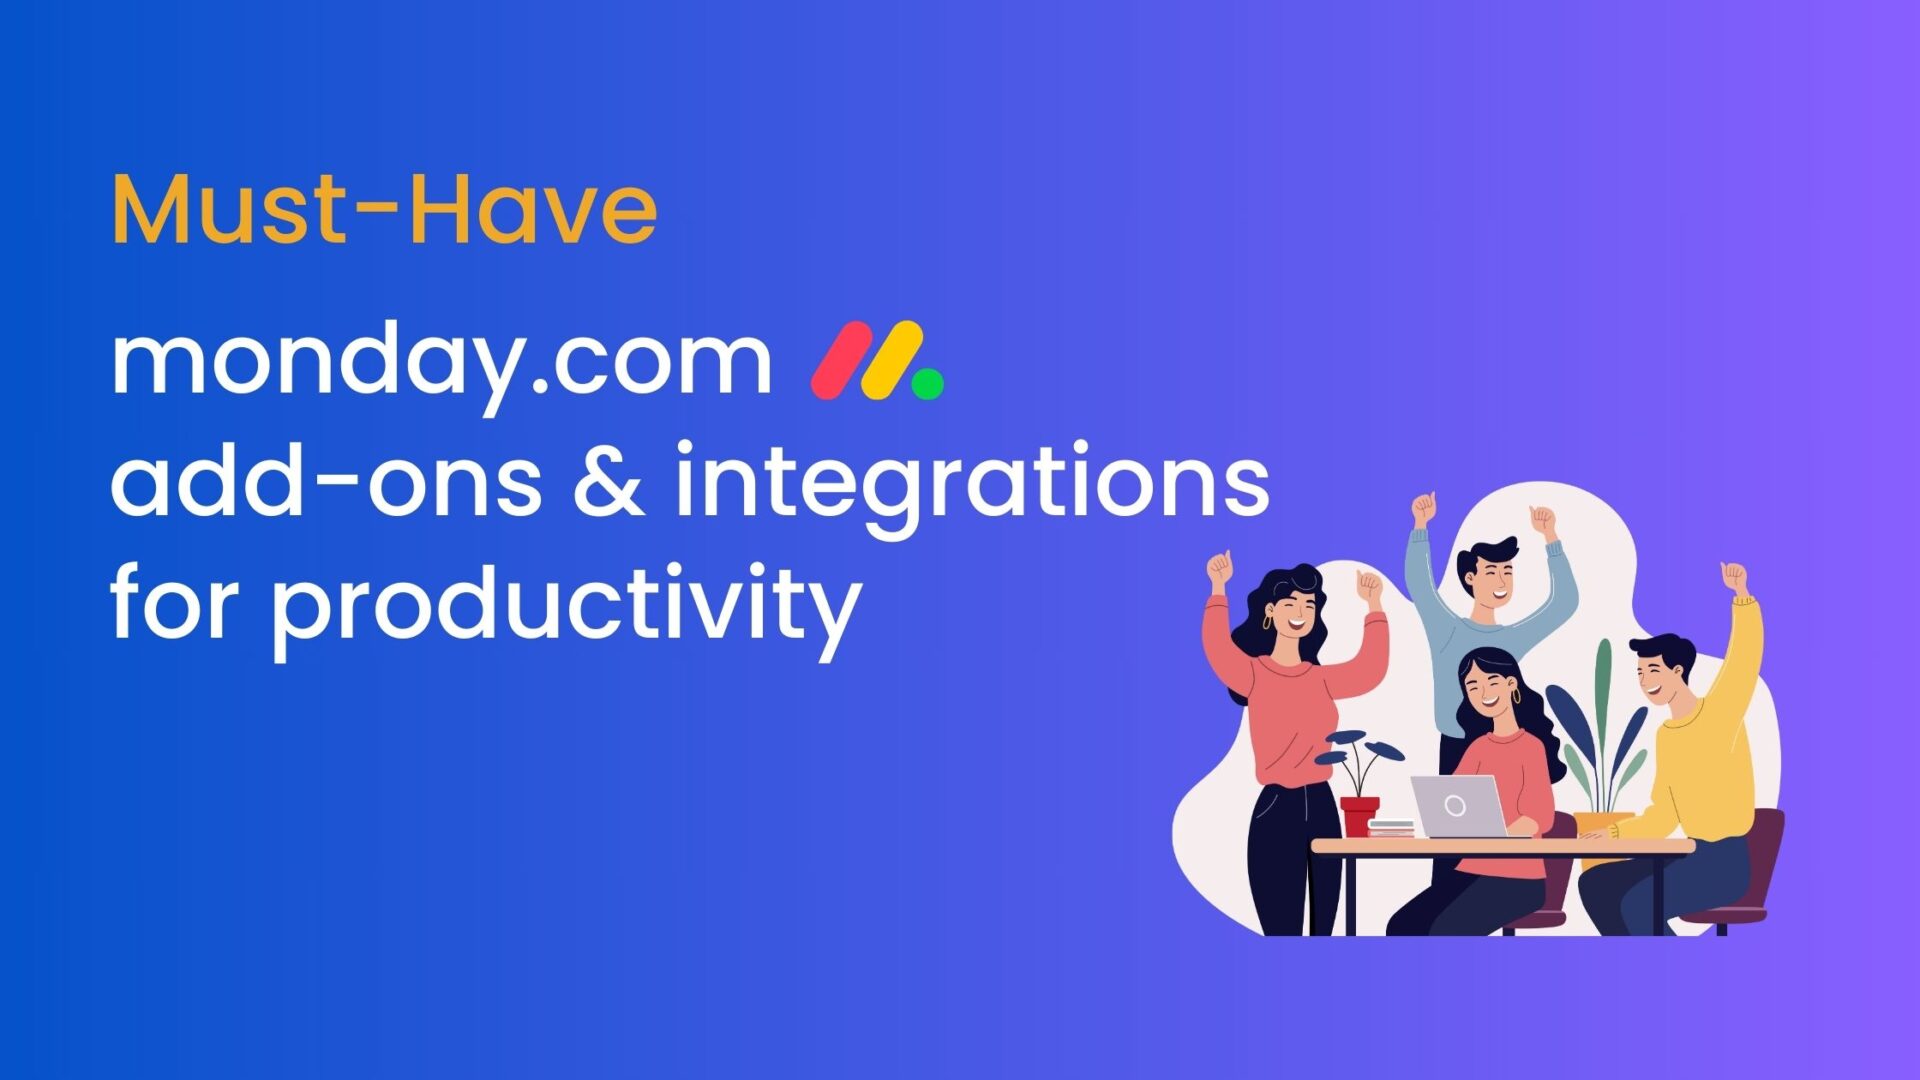 10 Must-Have monday.com add-ons & integrations for productivity